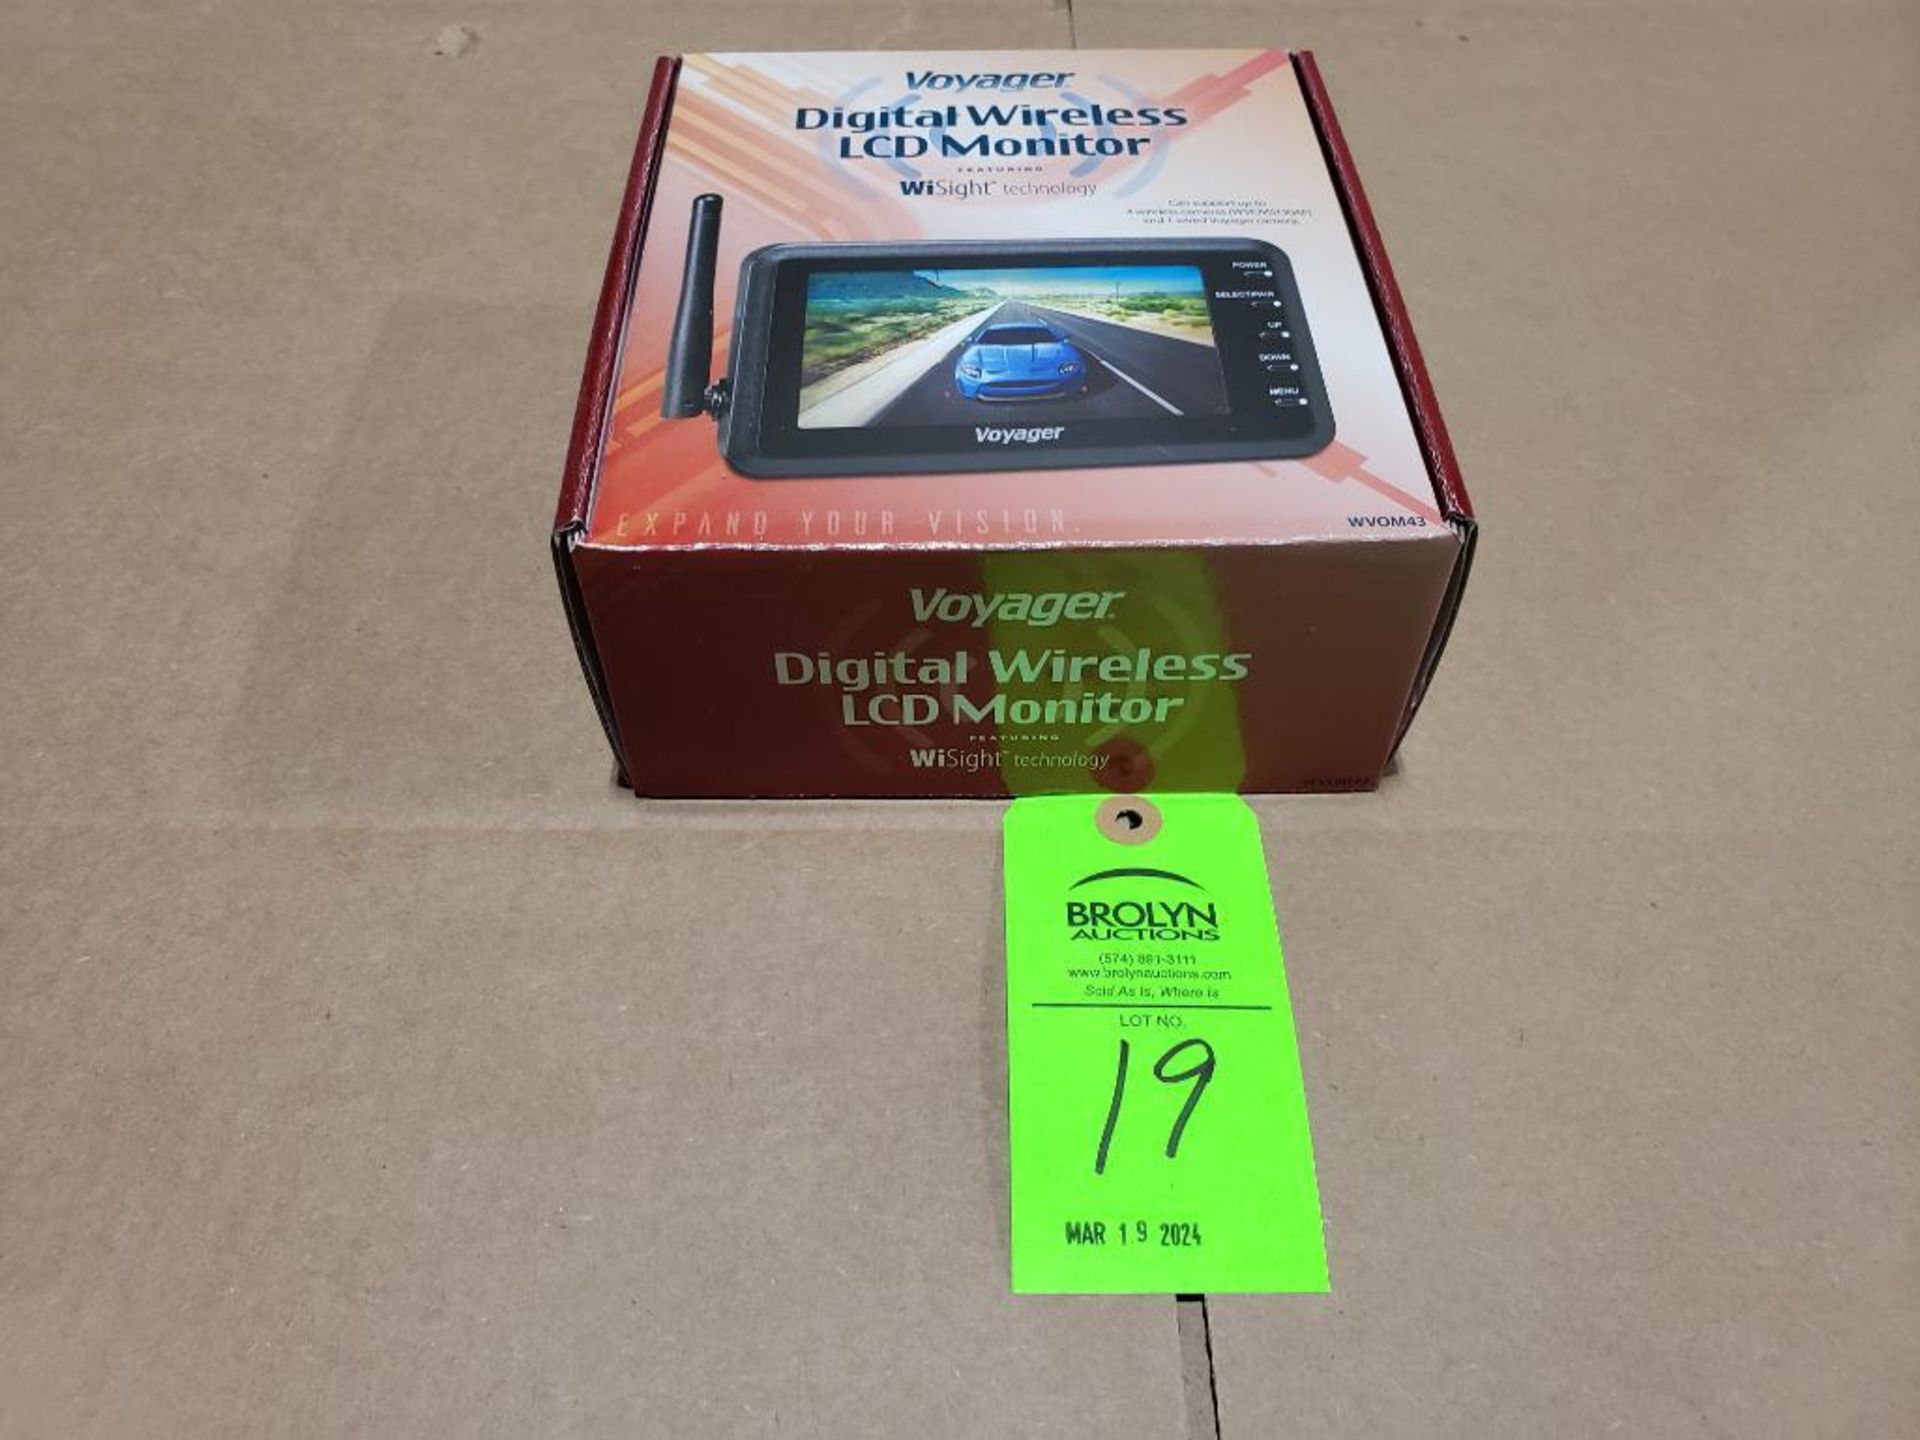 Voyager Digital Wireless LCD Monitor. Features WiSight techology. Model WVOM43.